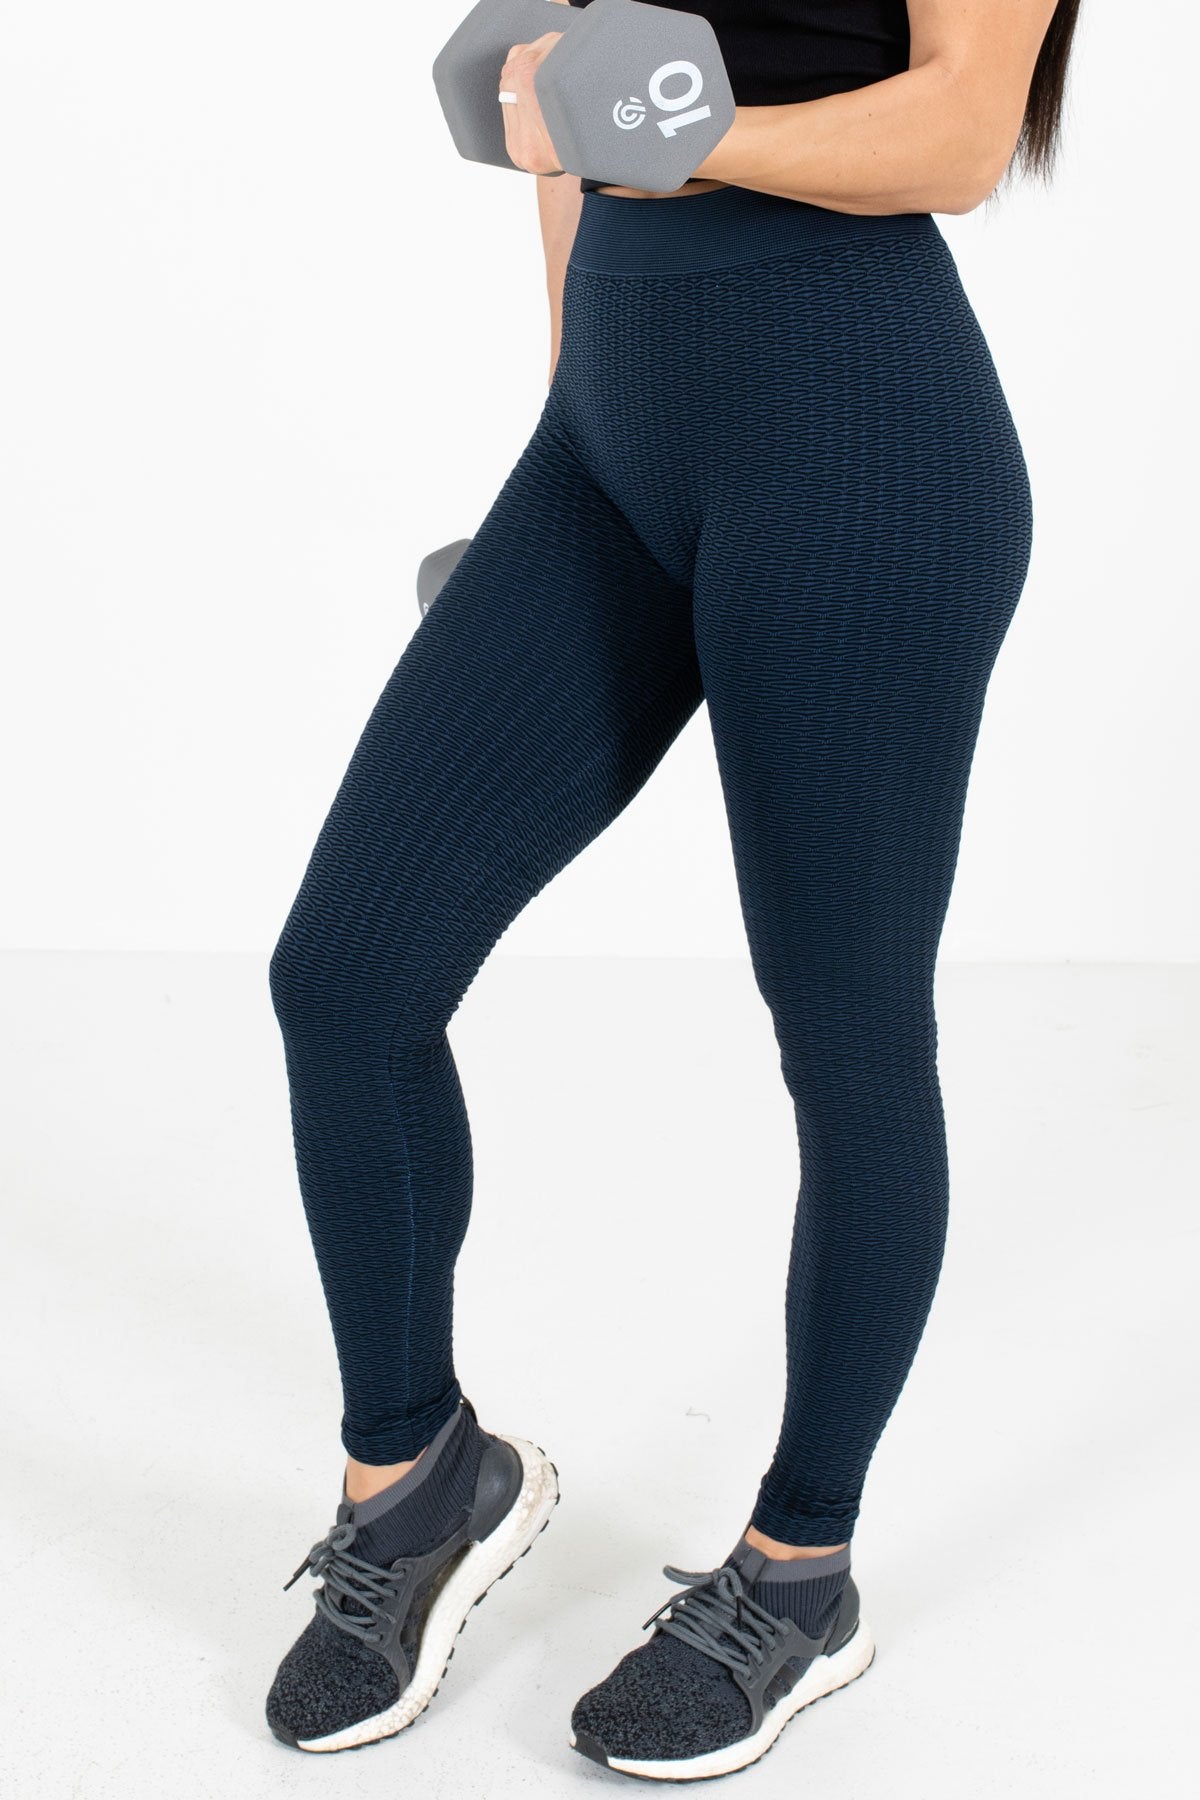 Navy High-Quality Stretchy Material Boutique Active Leggings for Women